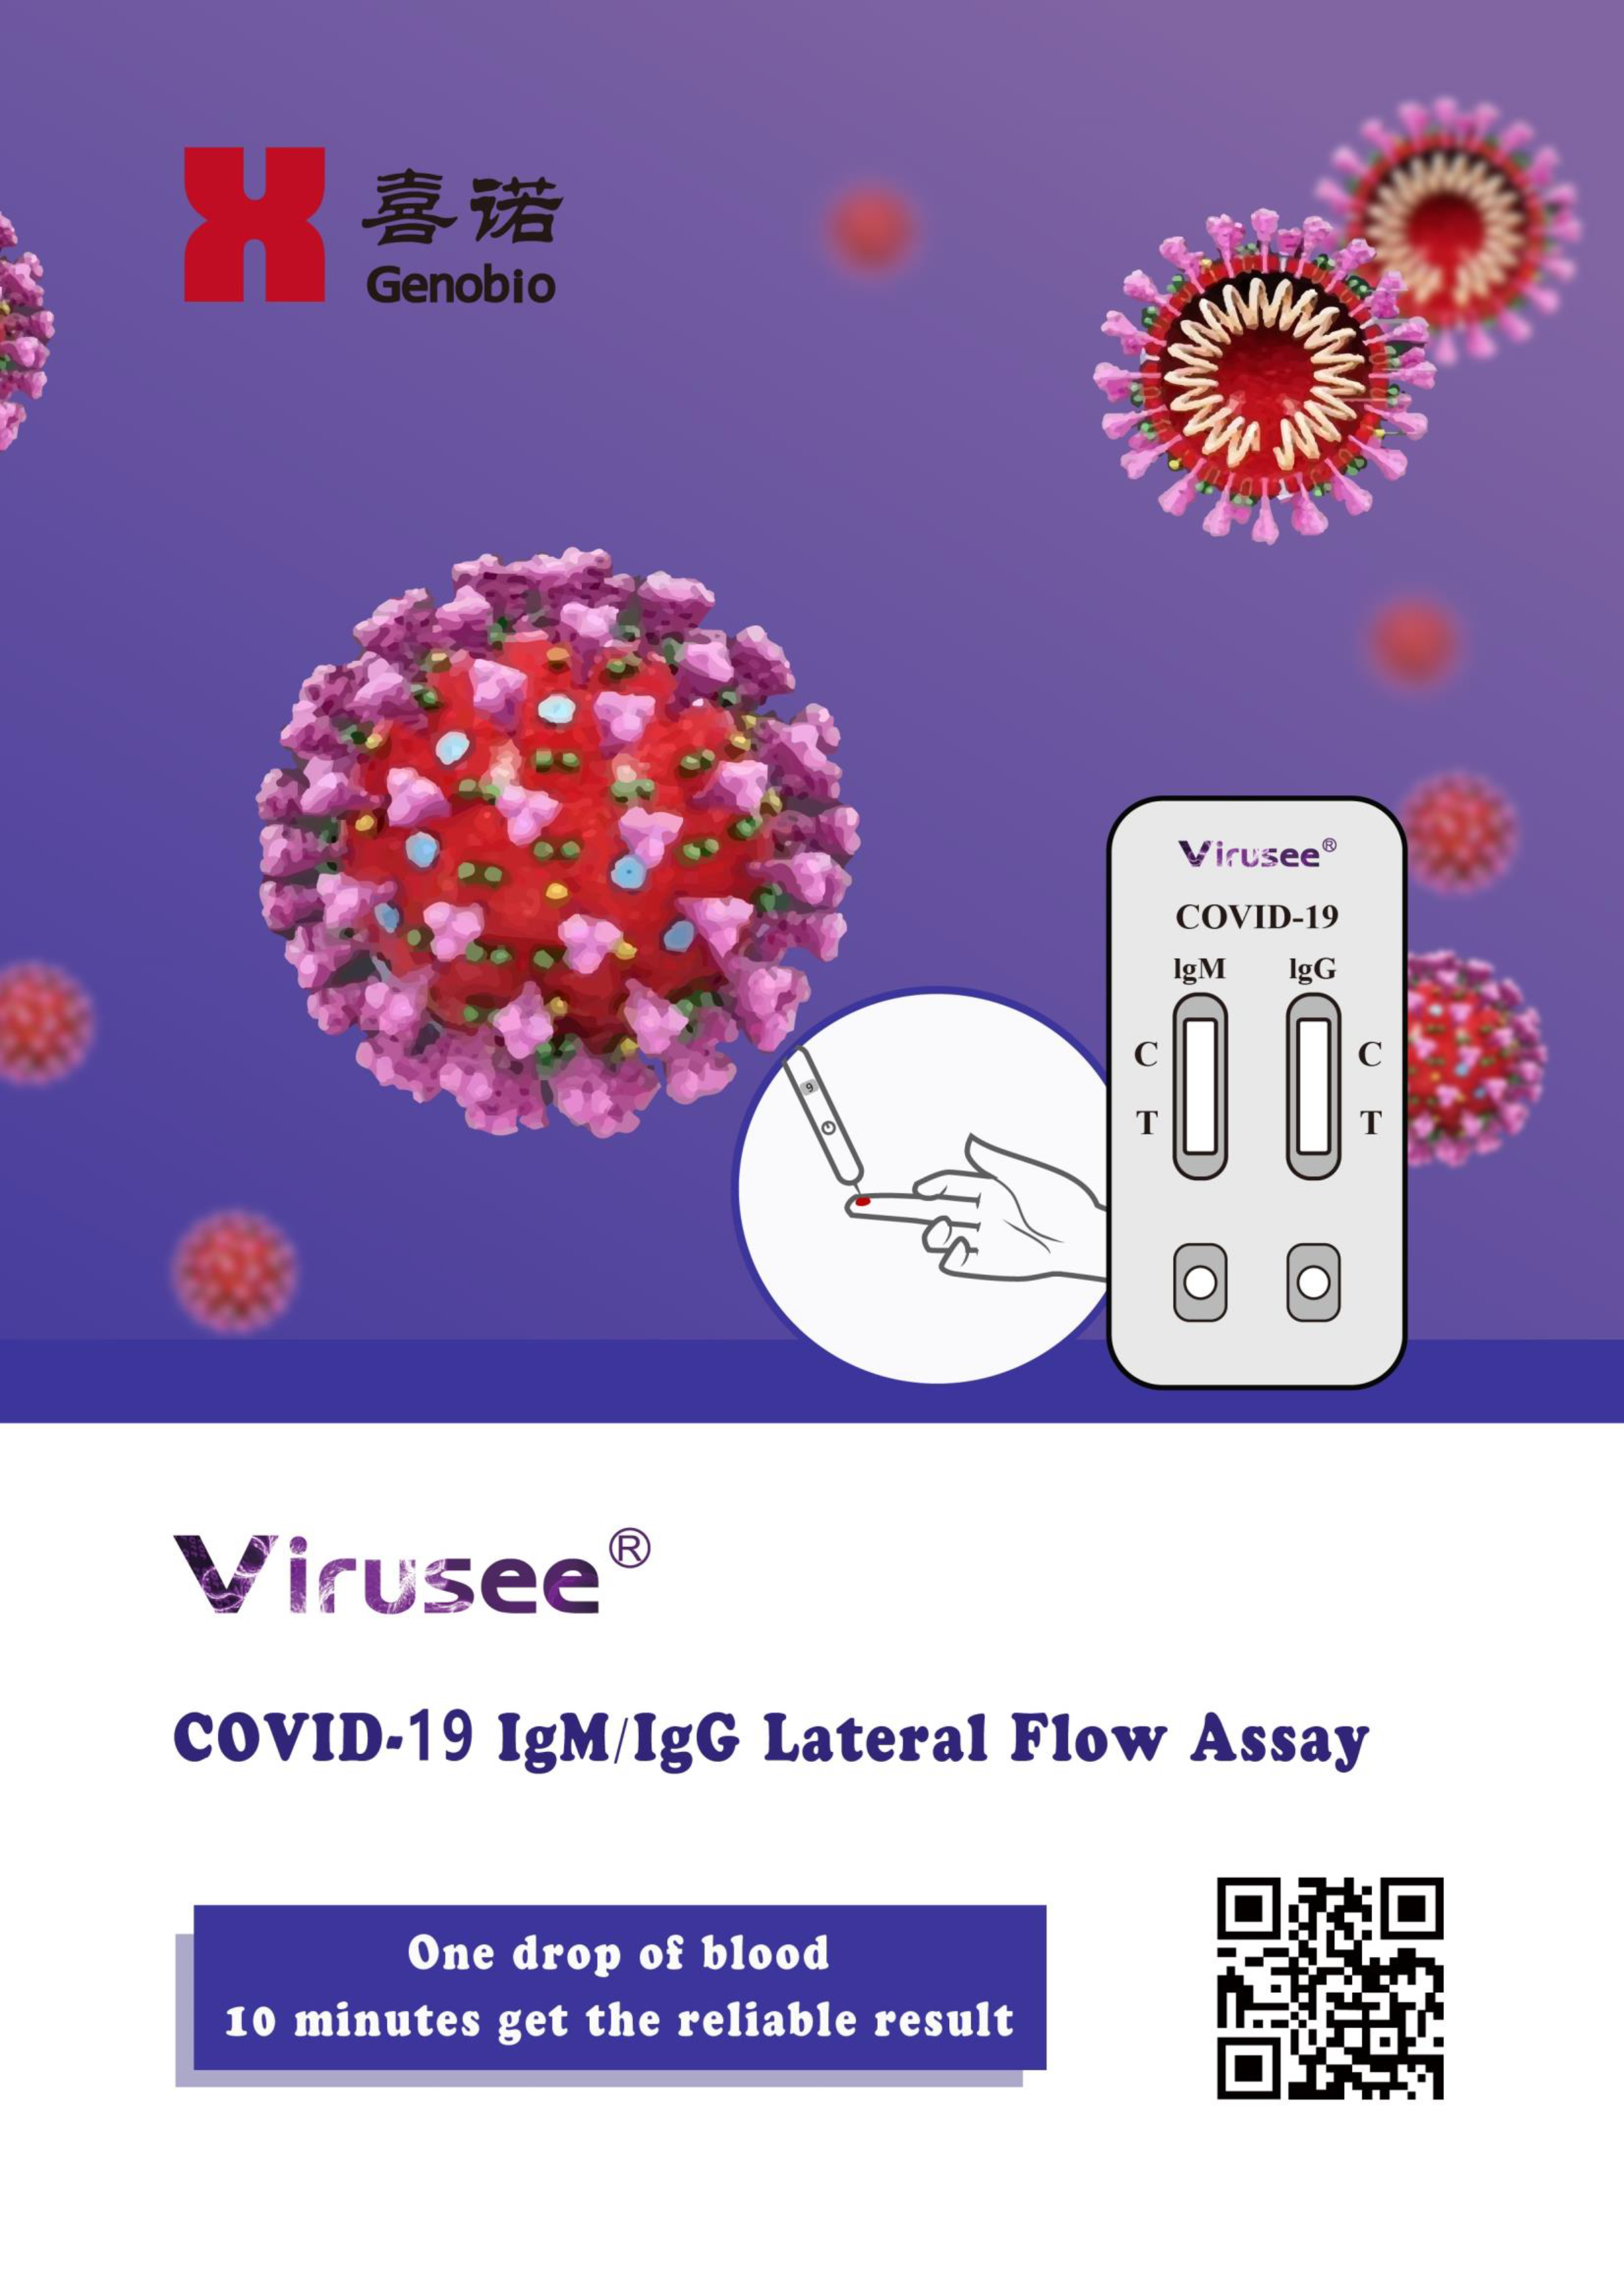 Virusee<sup>®</sup> COVID-19 IgM/IgG Lateral Flow Assay